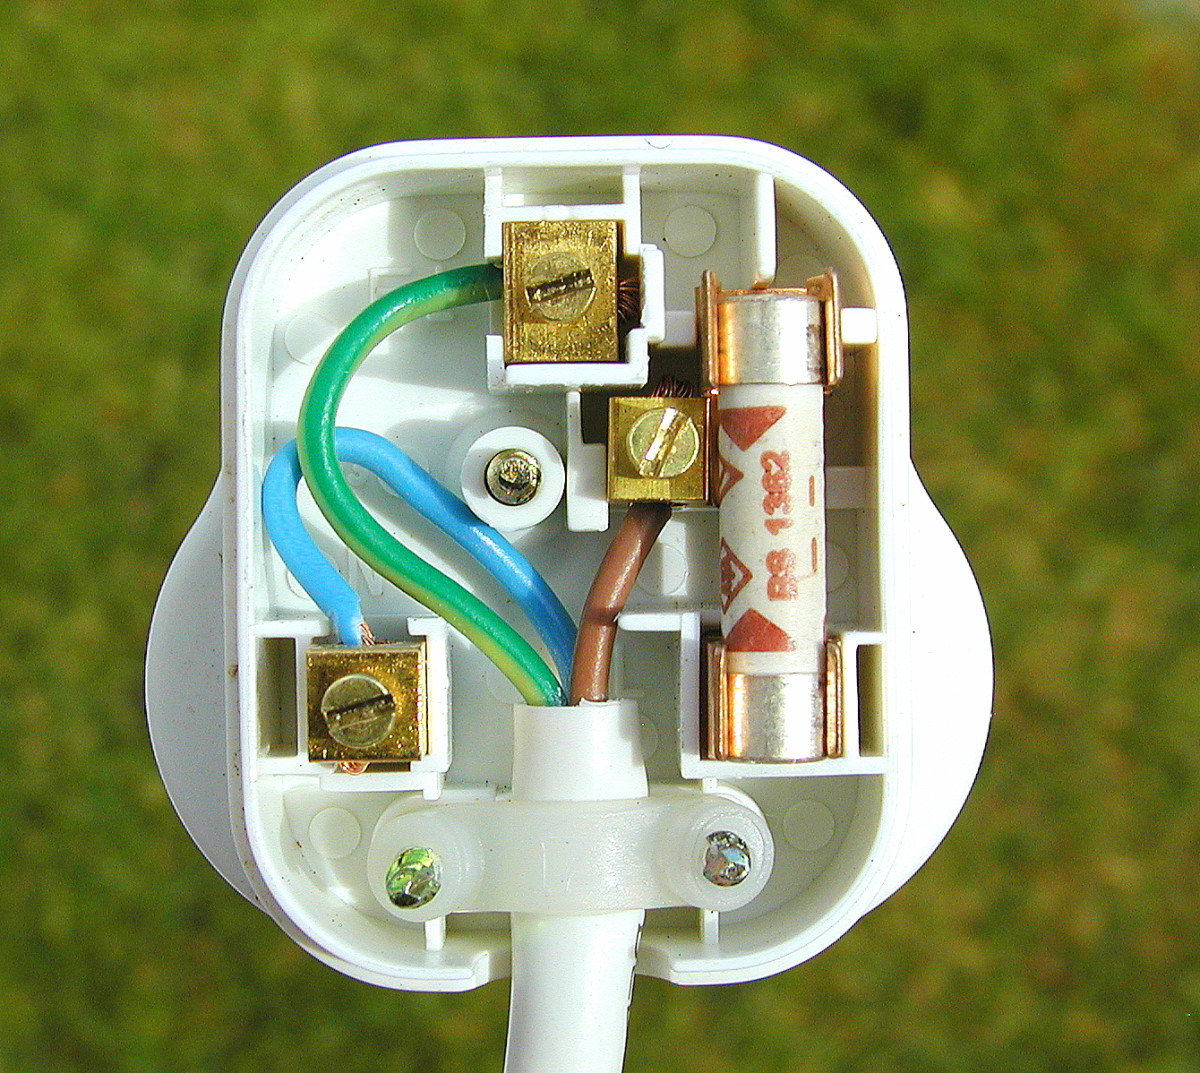 9 Easy Steps to Wiring a Plug Correctly and Safely | Dengarden plug wall ac unit wiring 